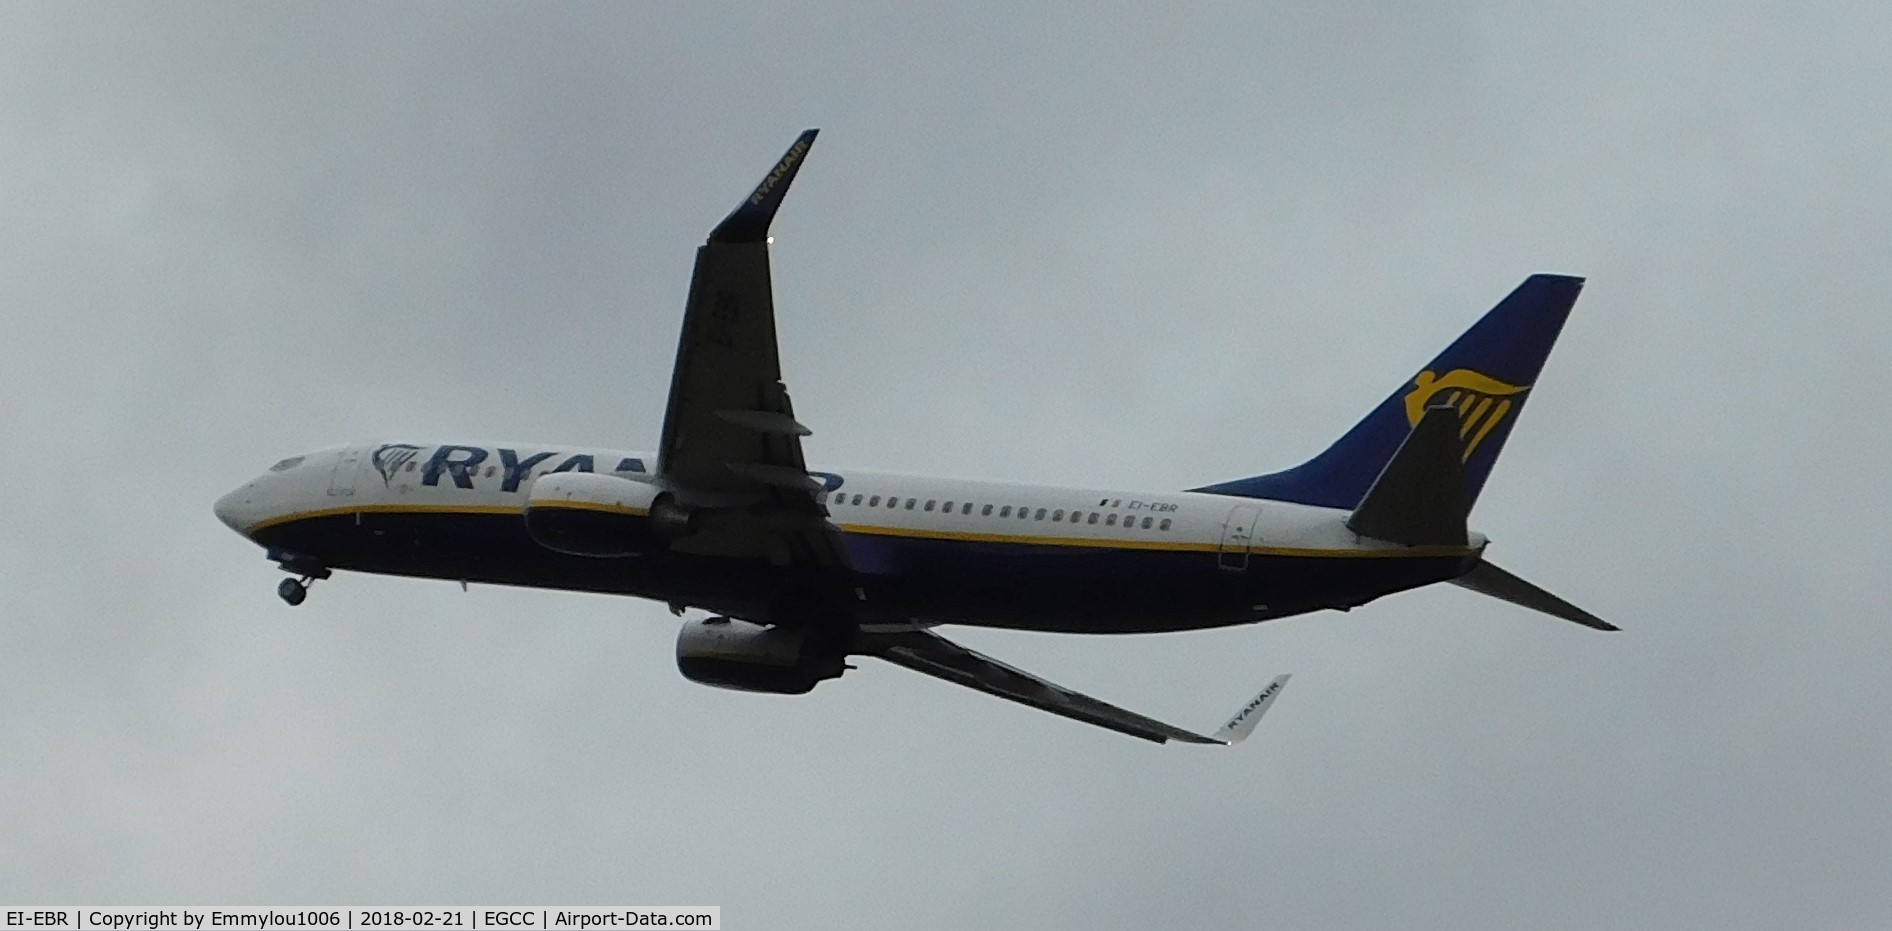 EI-EBR, 2009 Boeing 737-8AS C/N 37530, from airport pub Manchester